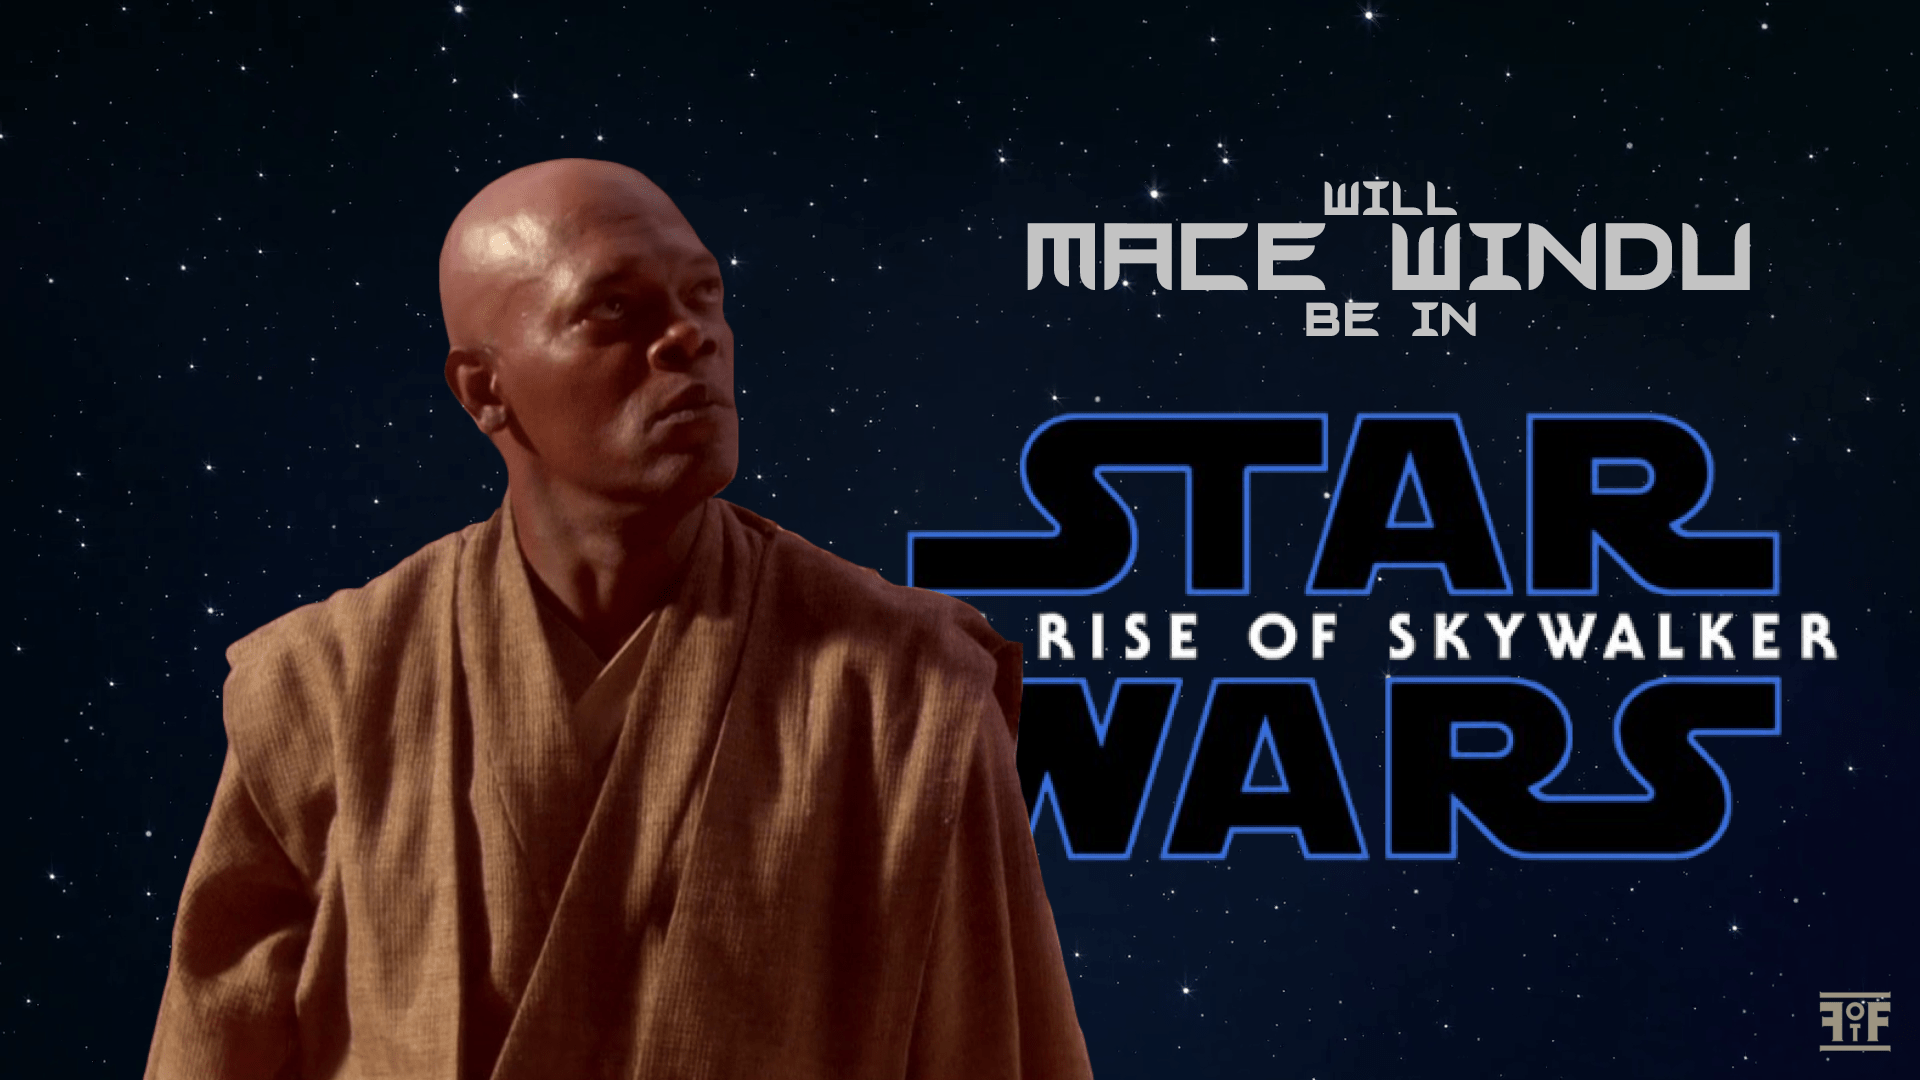 Star Wars. I Have a Prediction: Mace Windu Is Going To Be in 'The Rise of Skywalker' of the Force